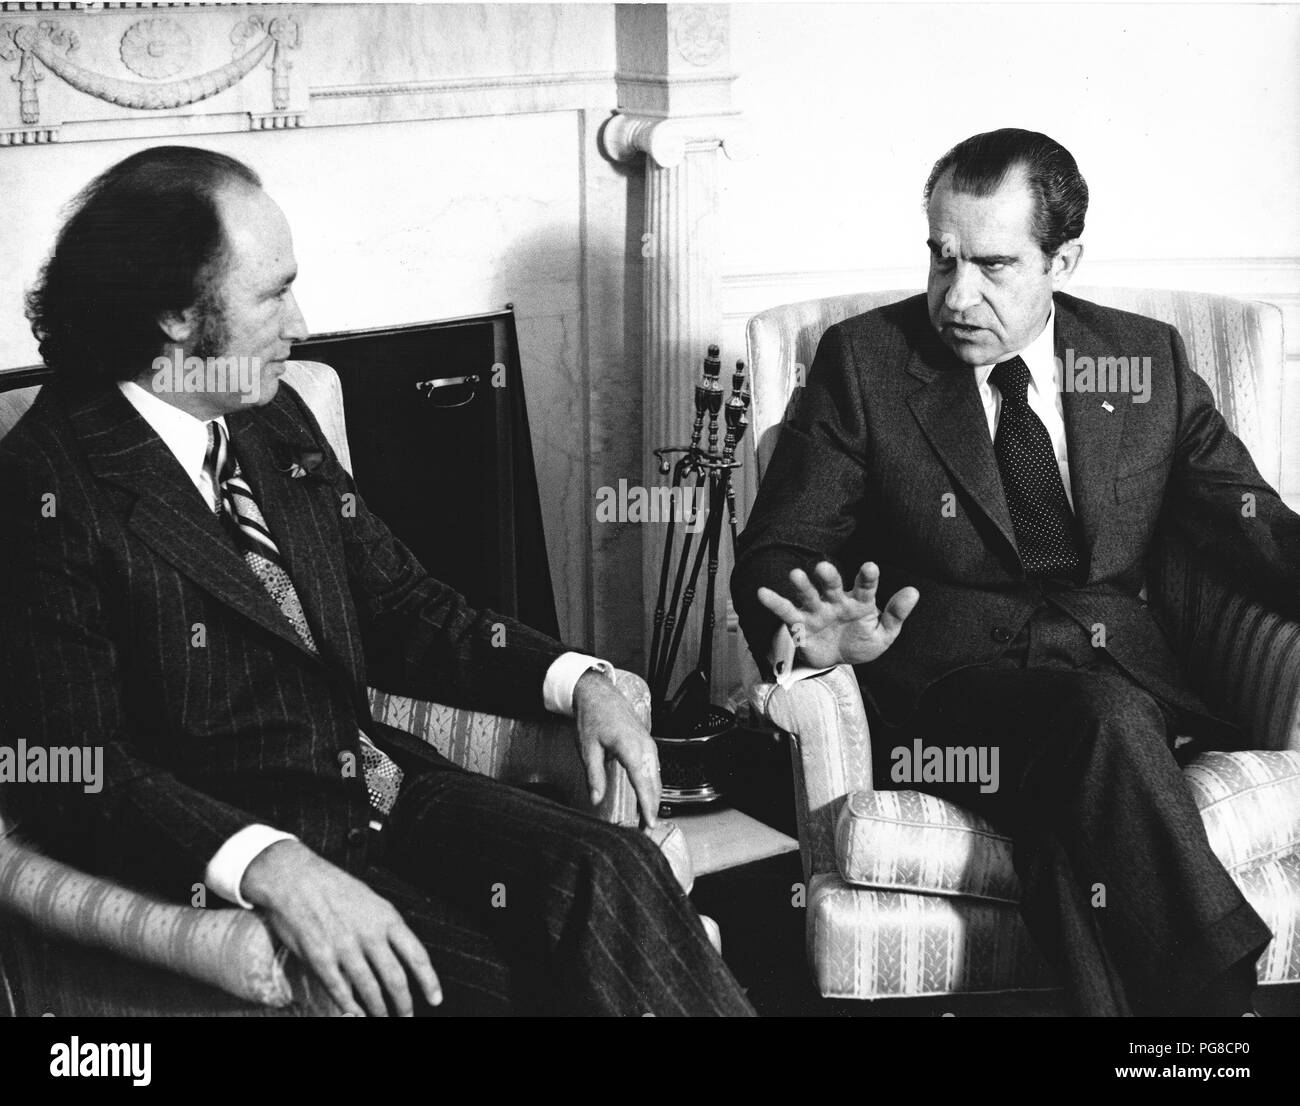 United States President Richard M. Nixon, right, meets Prime Minister Pierre Elliott Trudeau of Canada, left in the Oval Office of the White House in Washington, DC on December 6, 1971. The President consulted with the Prime Minister on his pending tcp to China. Trudeau is expected to be in Washington for two days and then return to Canada. Credit: Benjamin E. 'Gene' Forte / CNP  - NO WIRE SERVICE - | usage worldwide Stock Photo